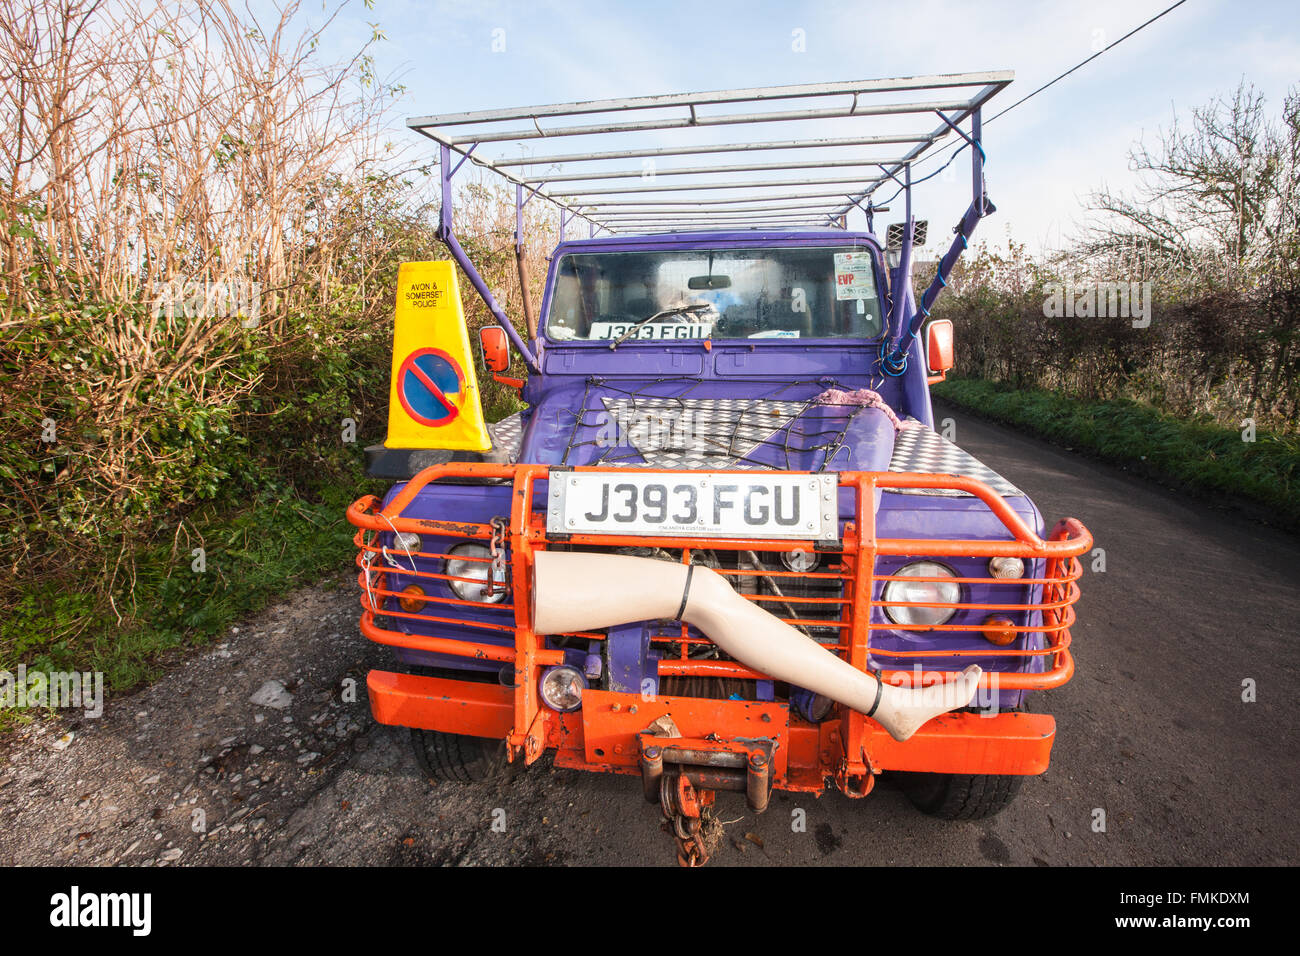 Vehicle with false fake leg attached to front bumper. Glastonbury,Town,Tor,Wearyall Hill,Somerset,England,U.K.,Europe. Stock Photo